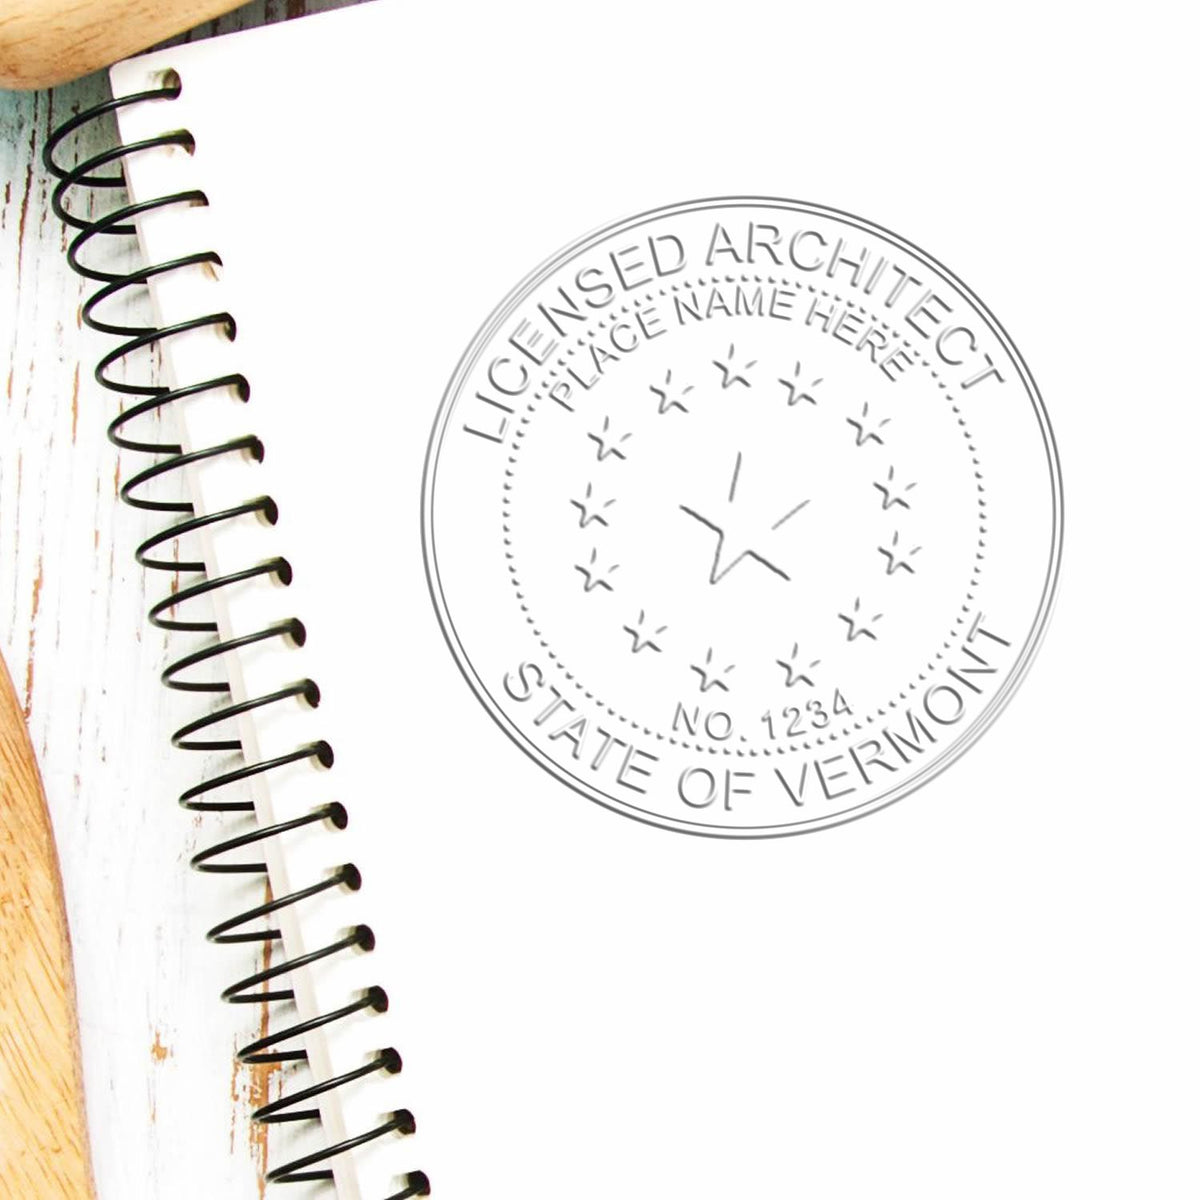 An in use photo of the Hybrid Vermont Architect Seal showing a sample imprint on a cardstock